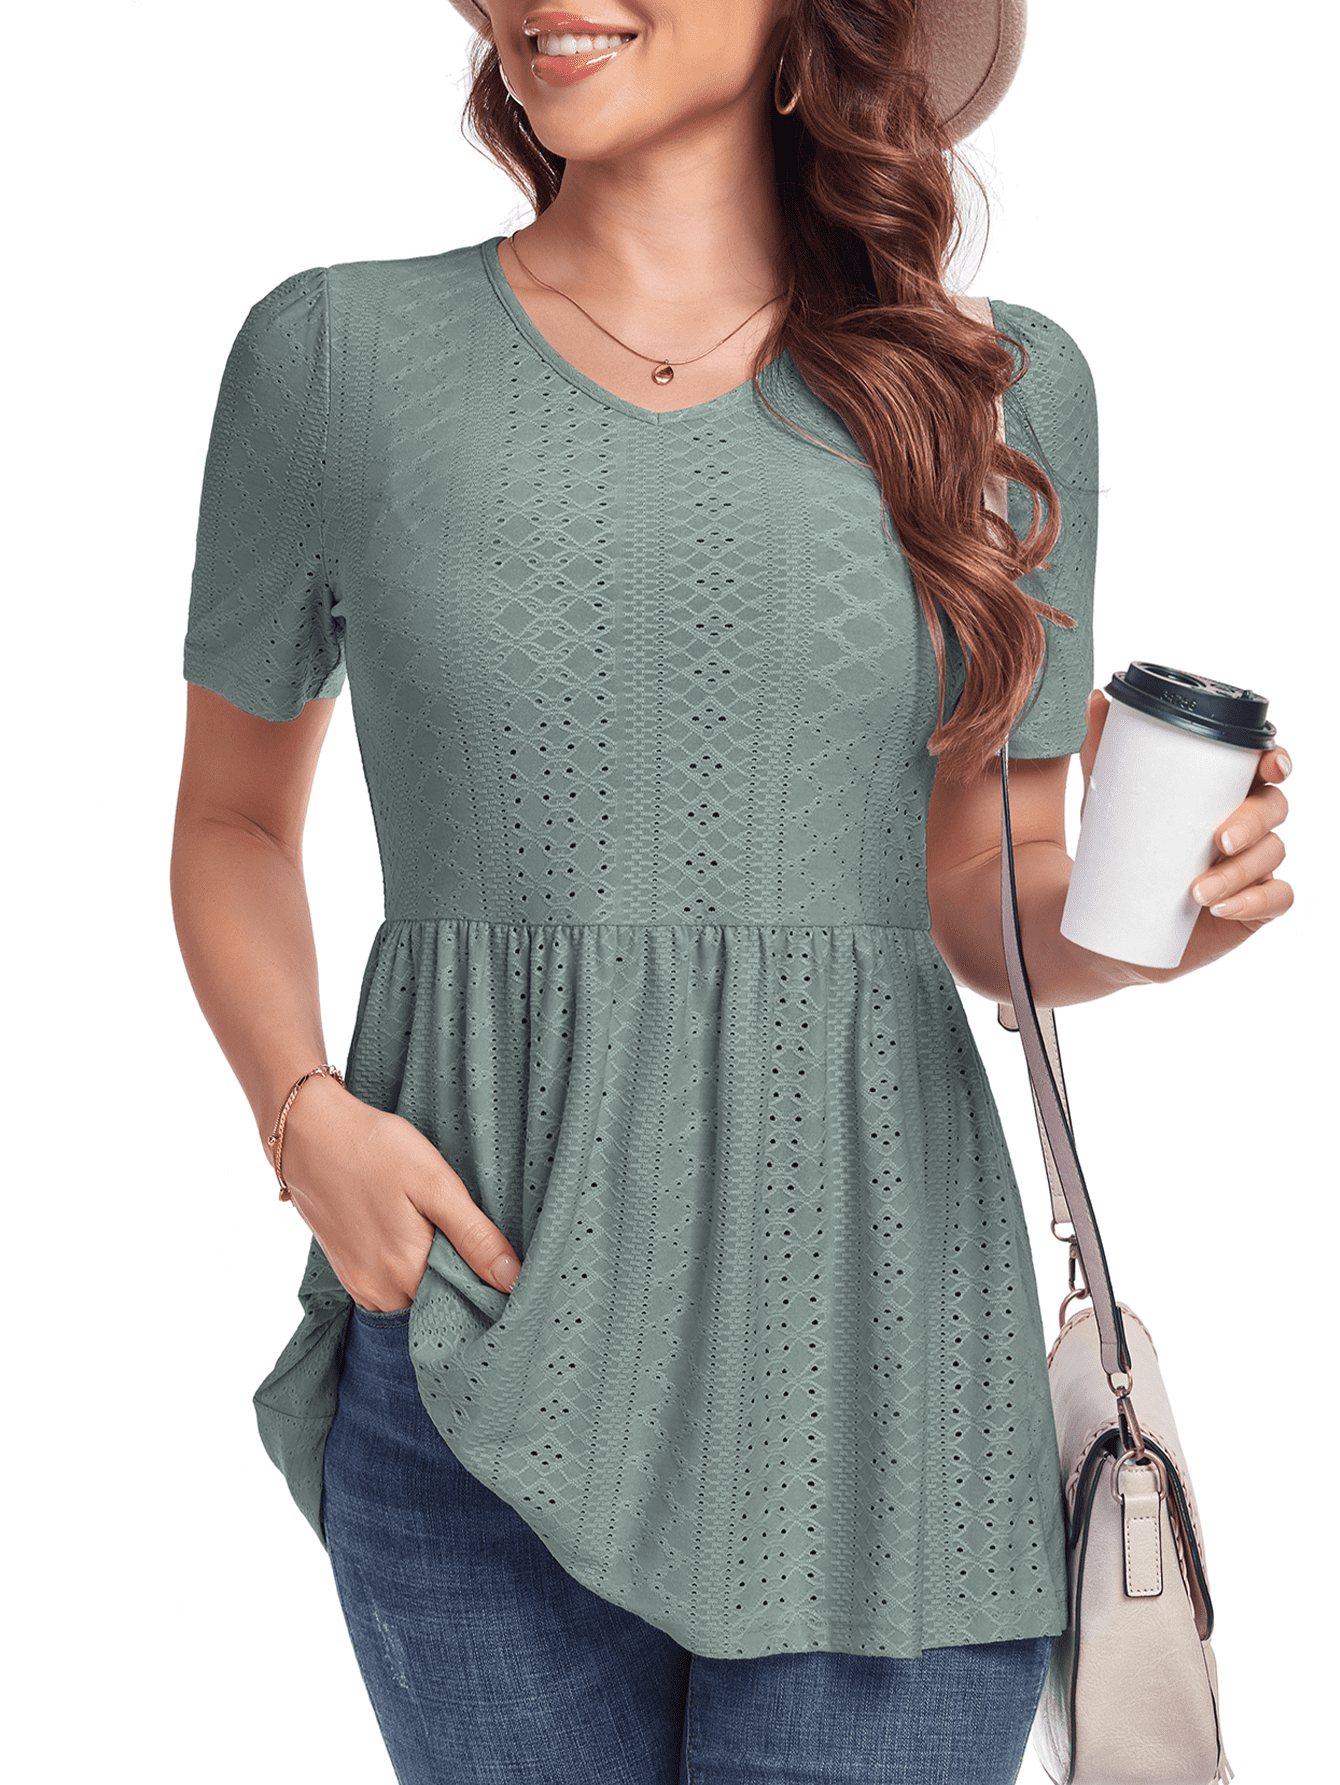 Womens Summer Short Sleeve Cute,15 Dollar Items,Womens Clearance  Tops,Womens Blouses Under 20,amazin Prime Deals,Fashion Deals, oct 11 and  12 Grey